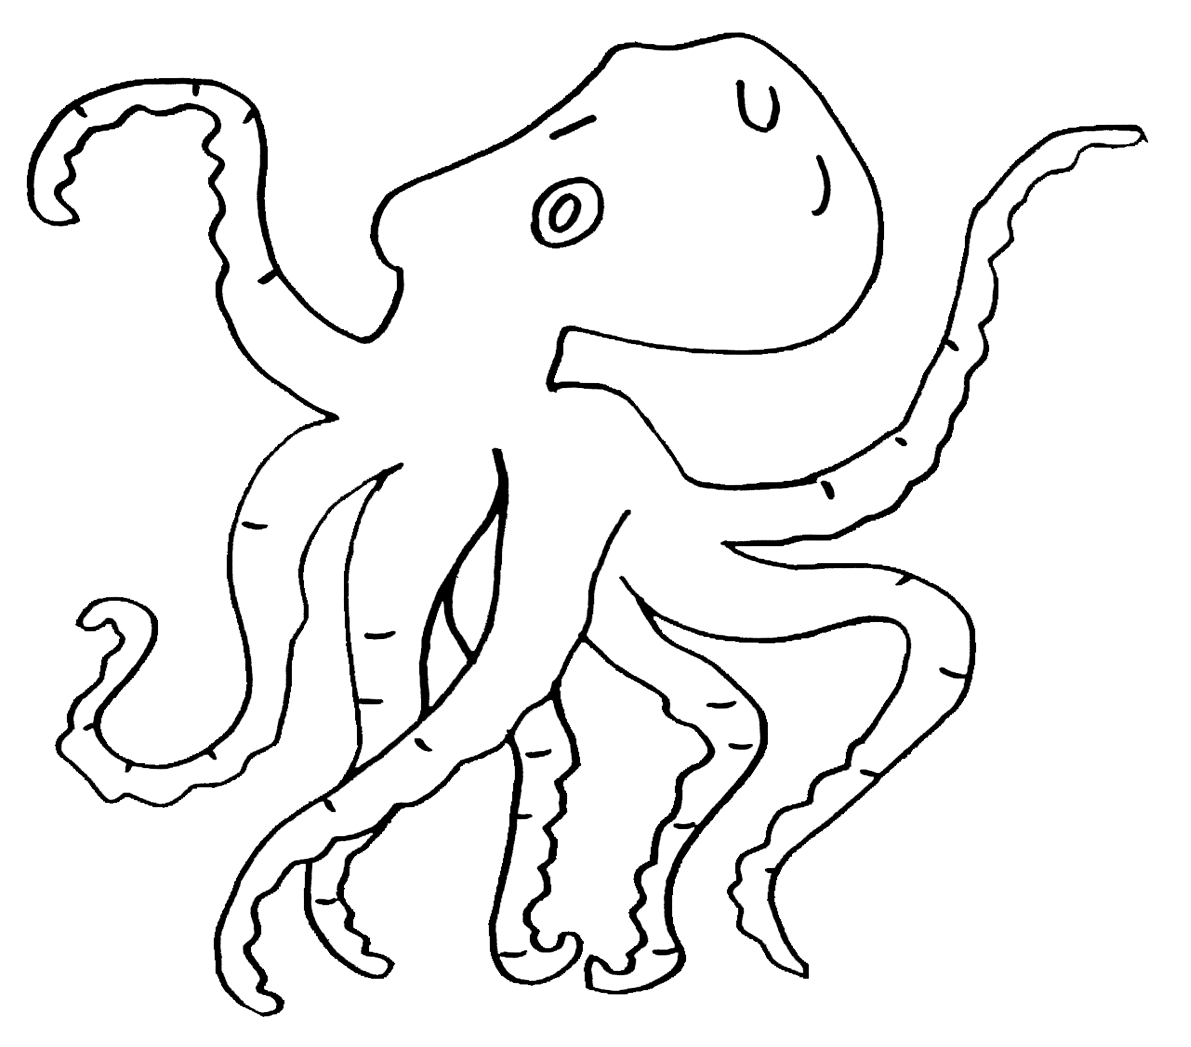 octopus coloring book pages - photo #14